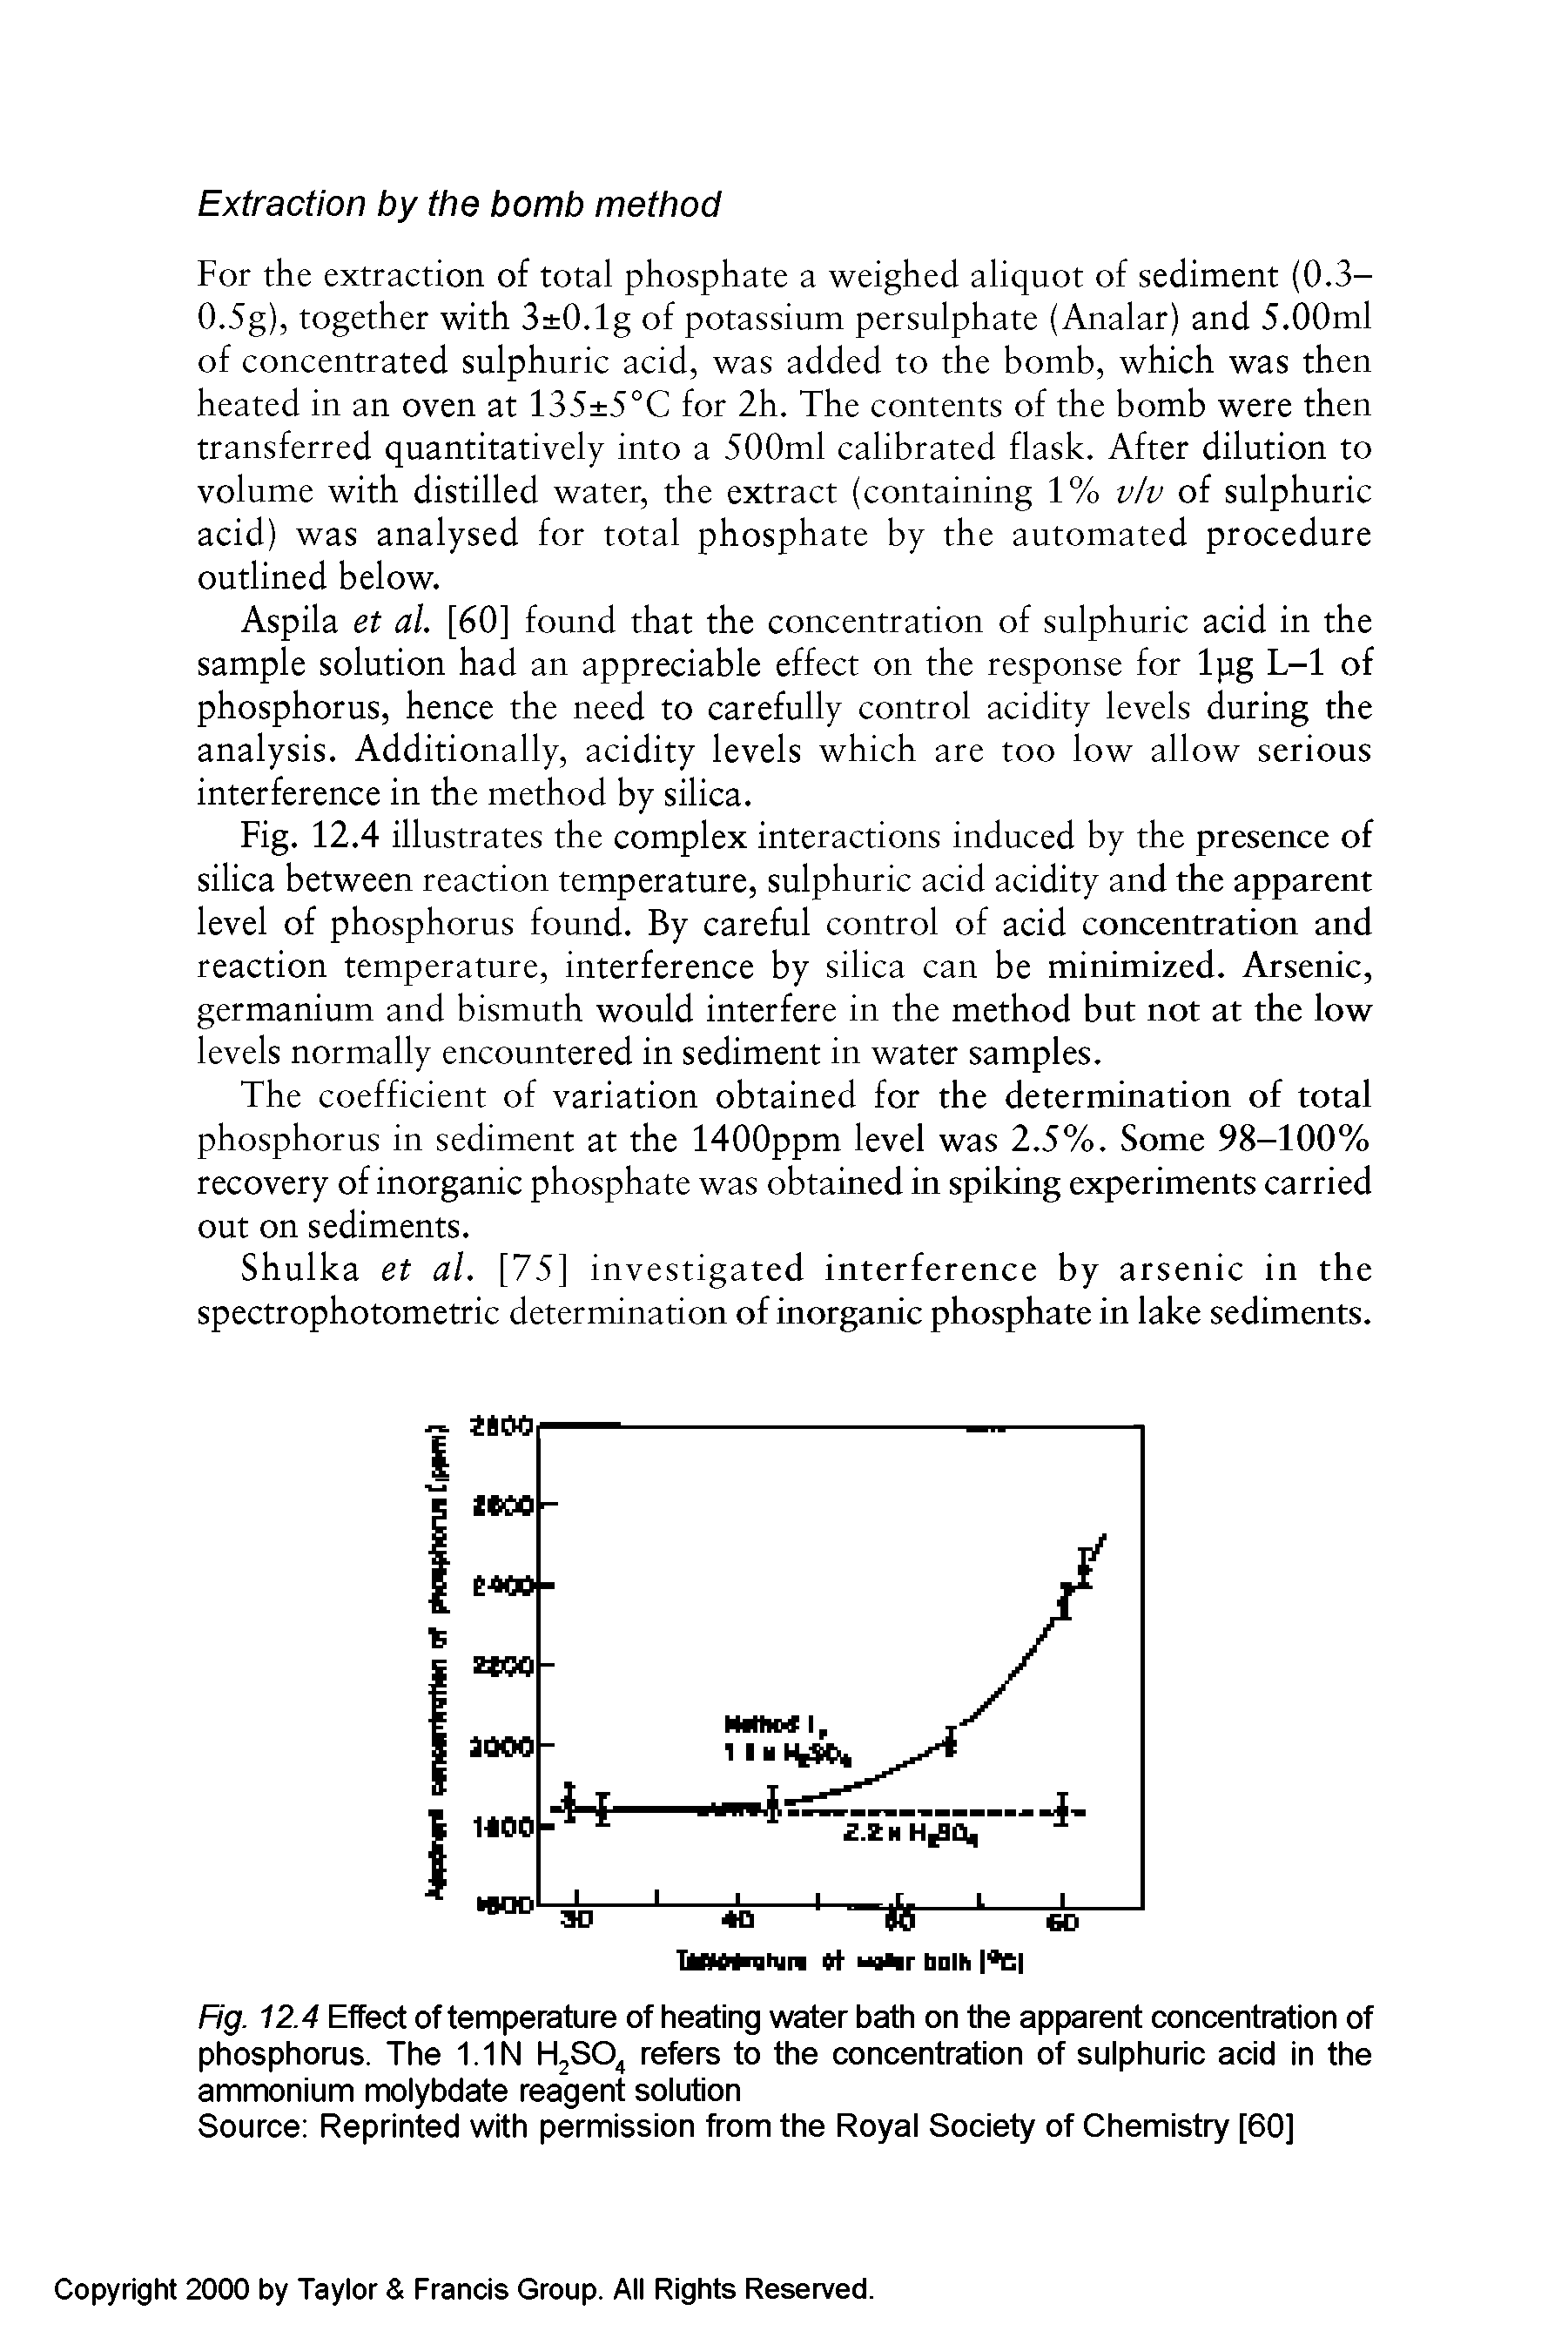 Fig. 12.4 Effect of temperature of heating water bath on the apparent concentration of phosphorus. The 1.1 N H2S04 refers to the concentration of sulphuric acid in the ammonium molybdate reagent solution...